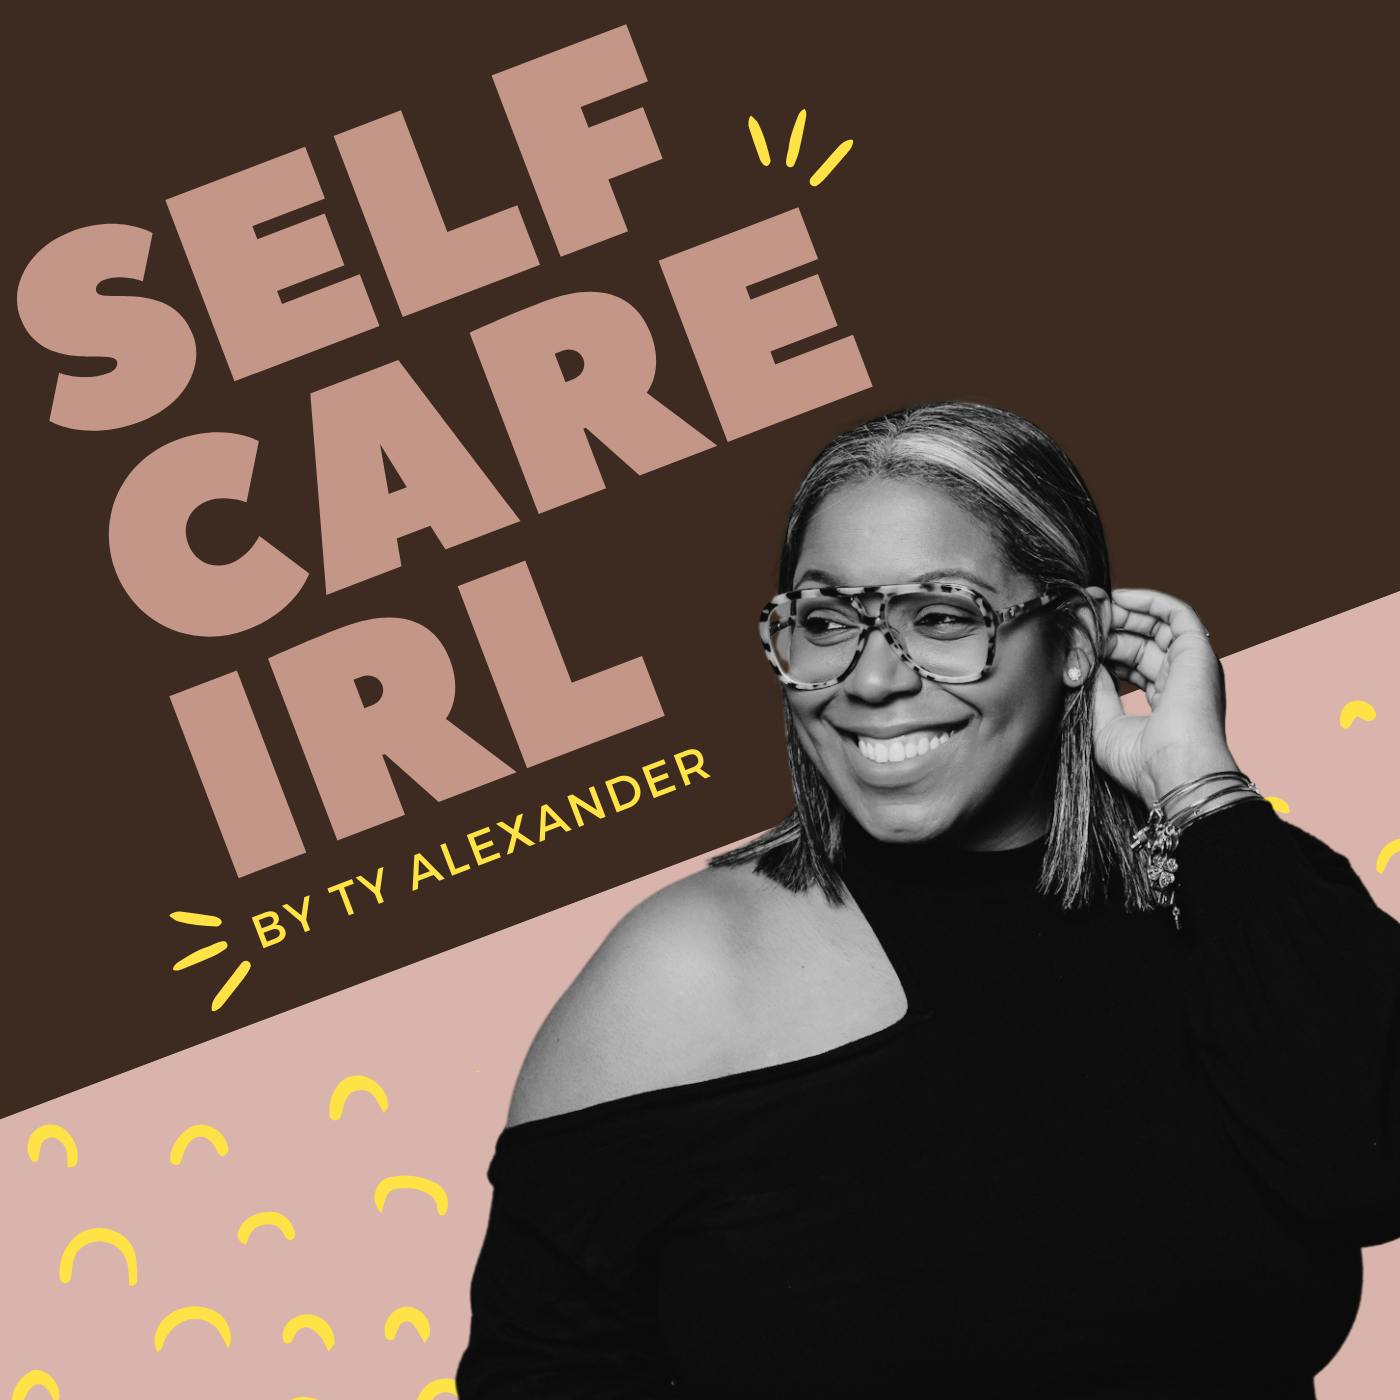 13. How to Take Care of Yourself While Being a Caregiver